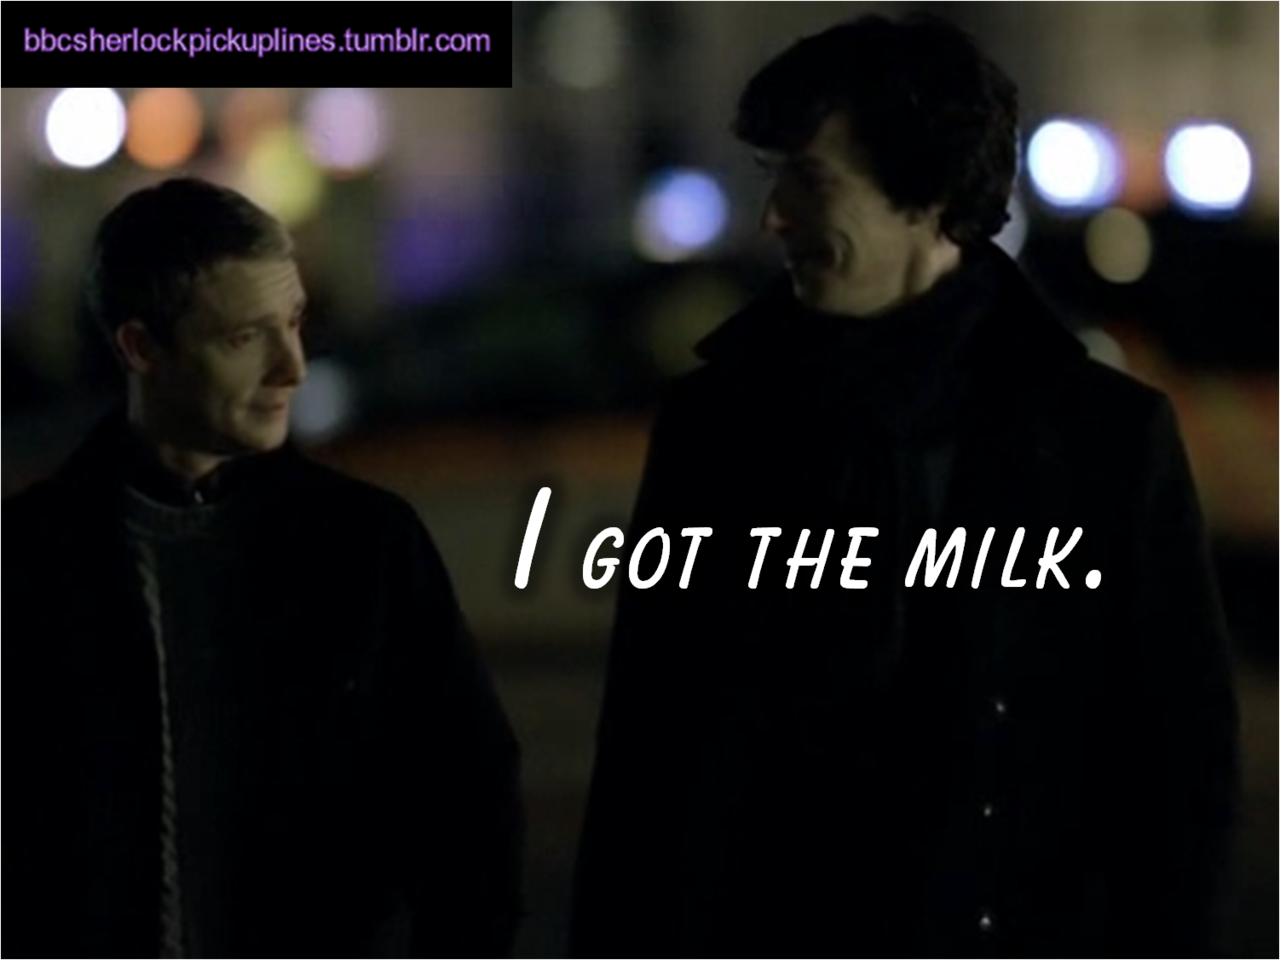 The best of fandom crack references, from BBC Sherlock pick-up lines.